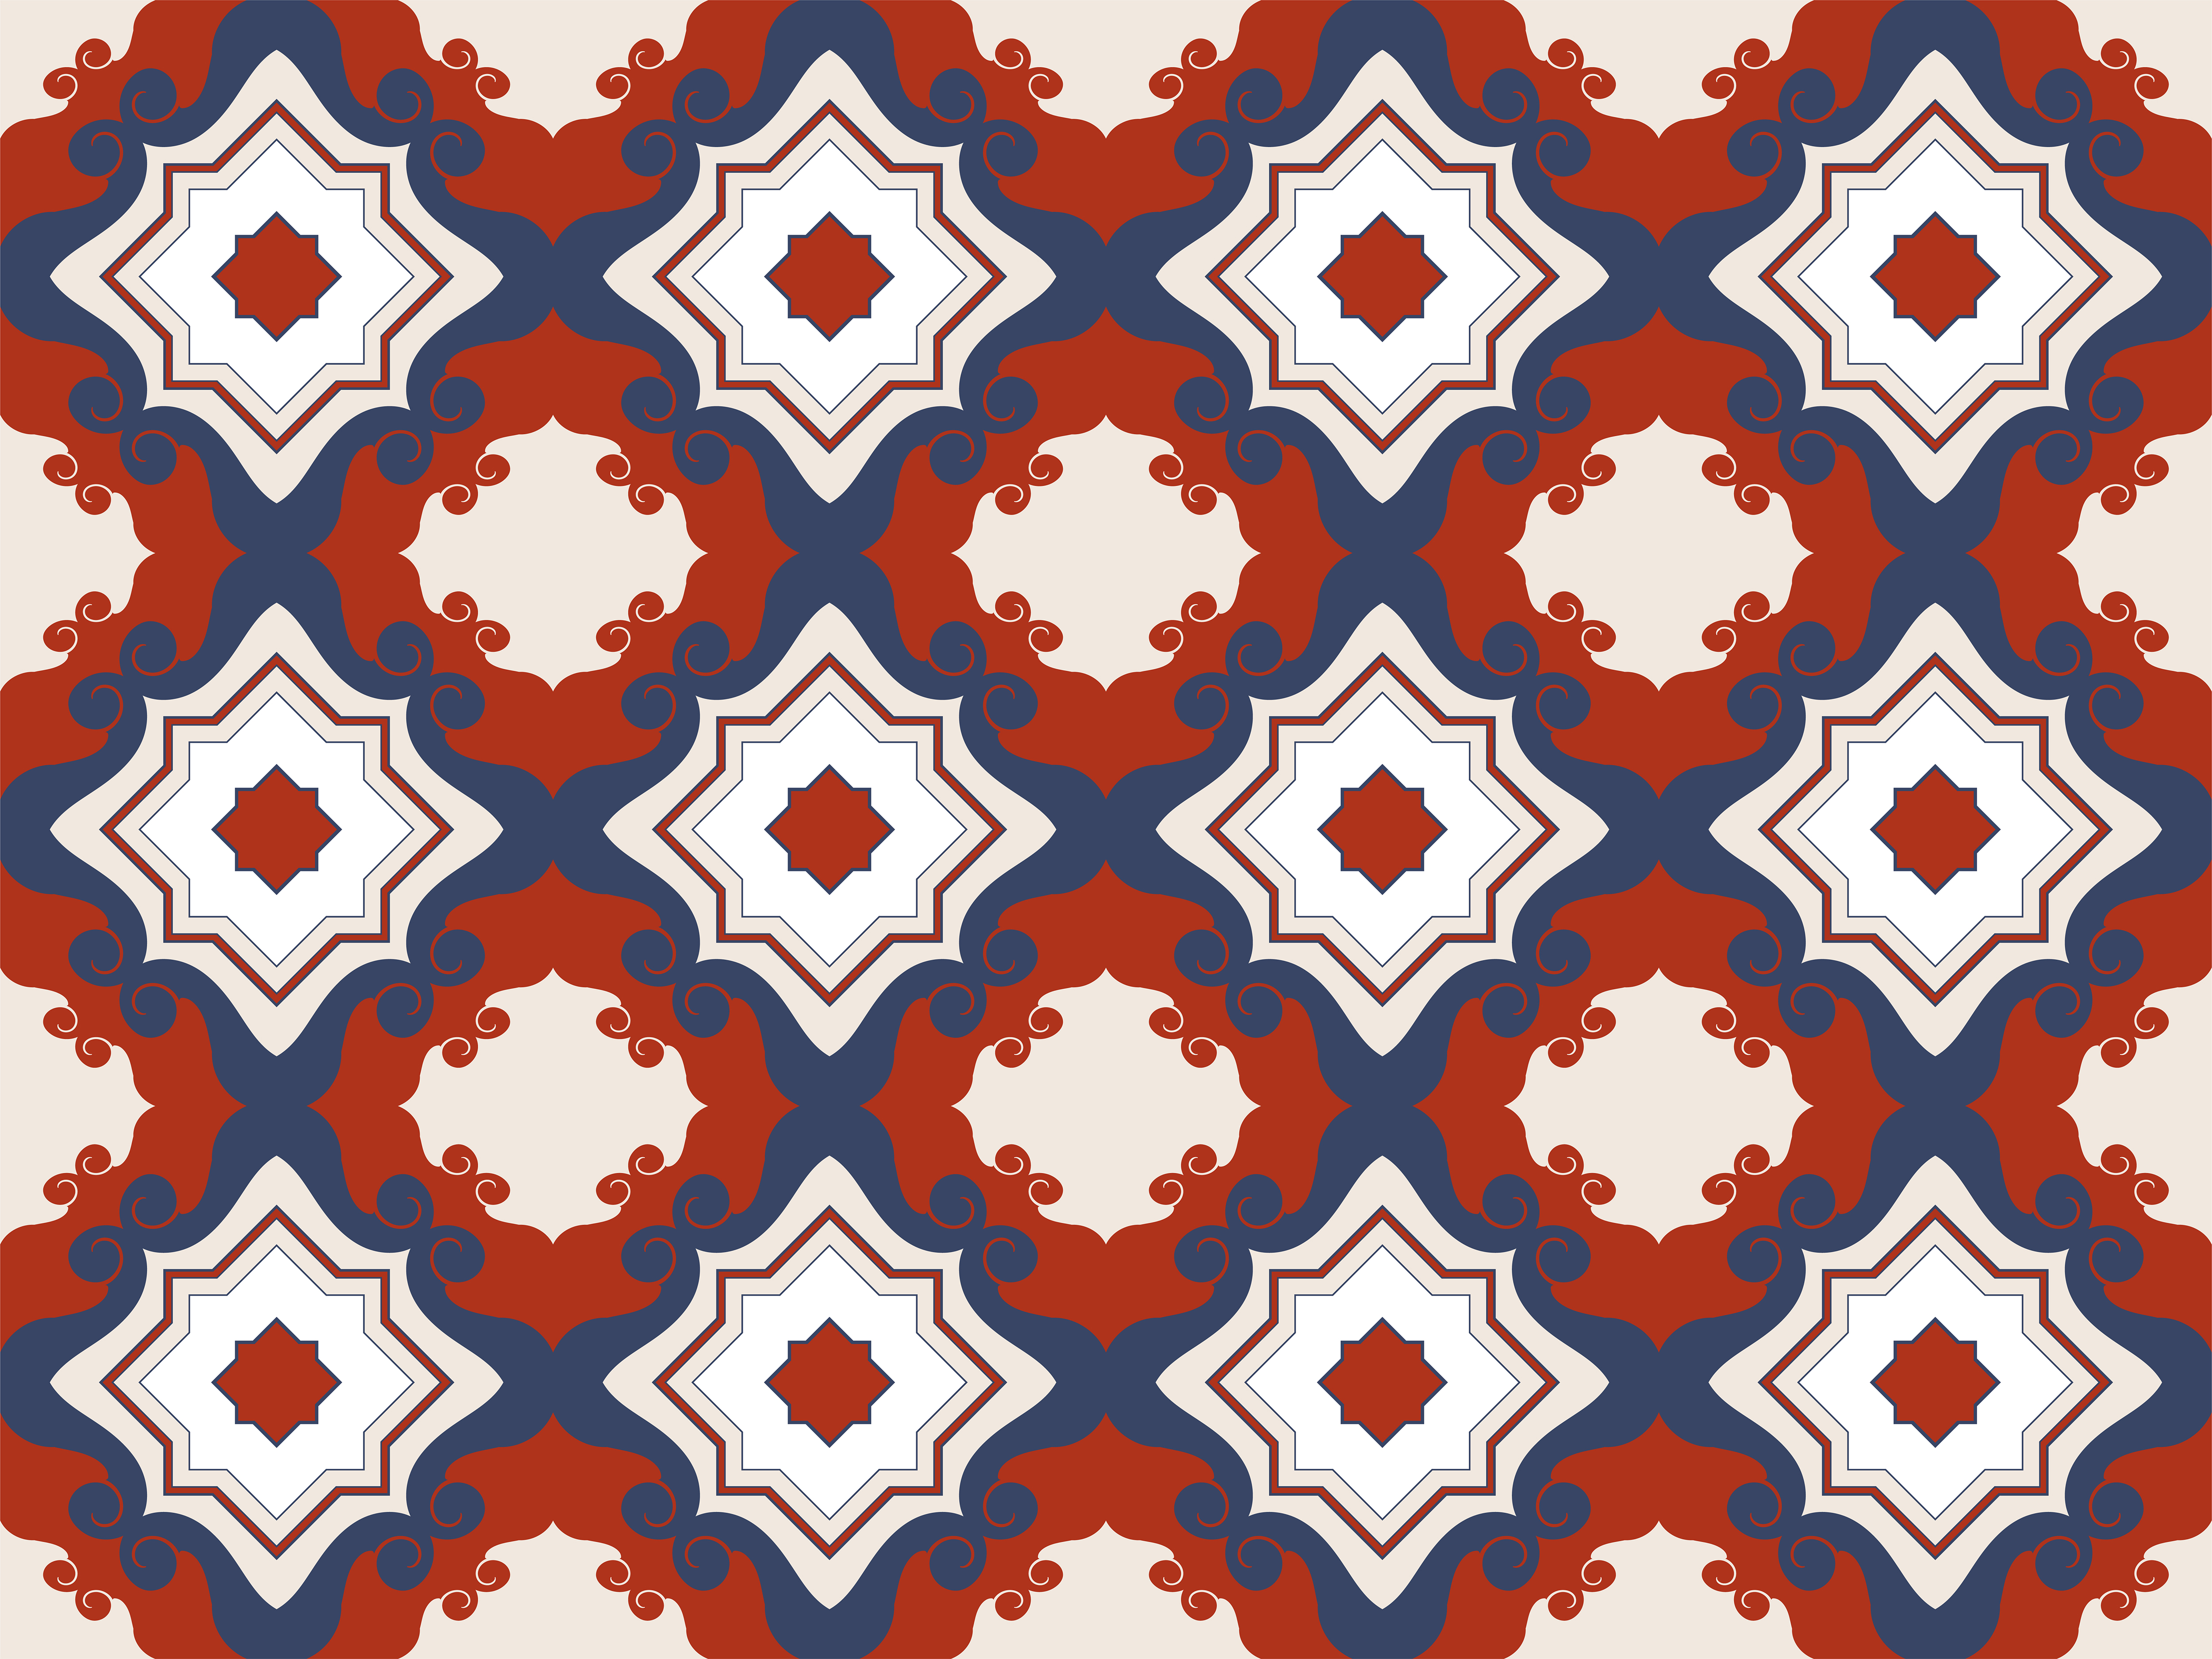 Illustration Of Tiles Textured Pattern Download Free Vectors Clipart